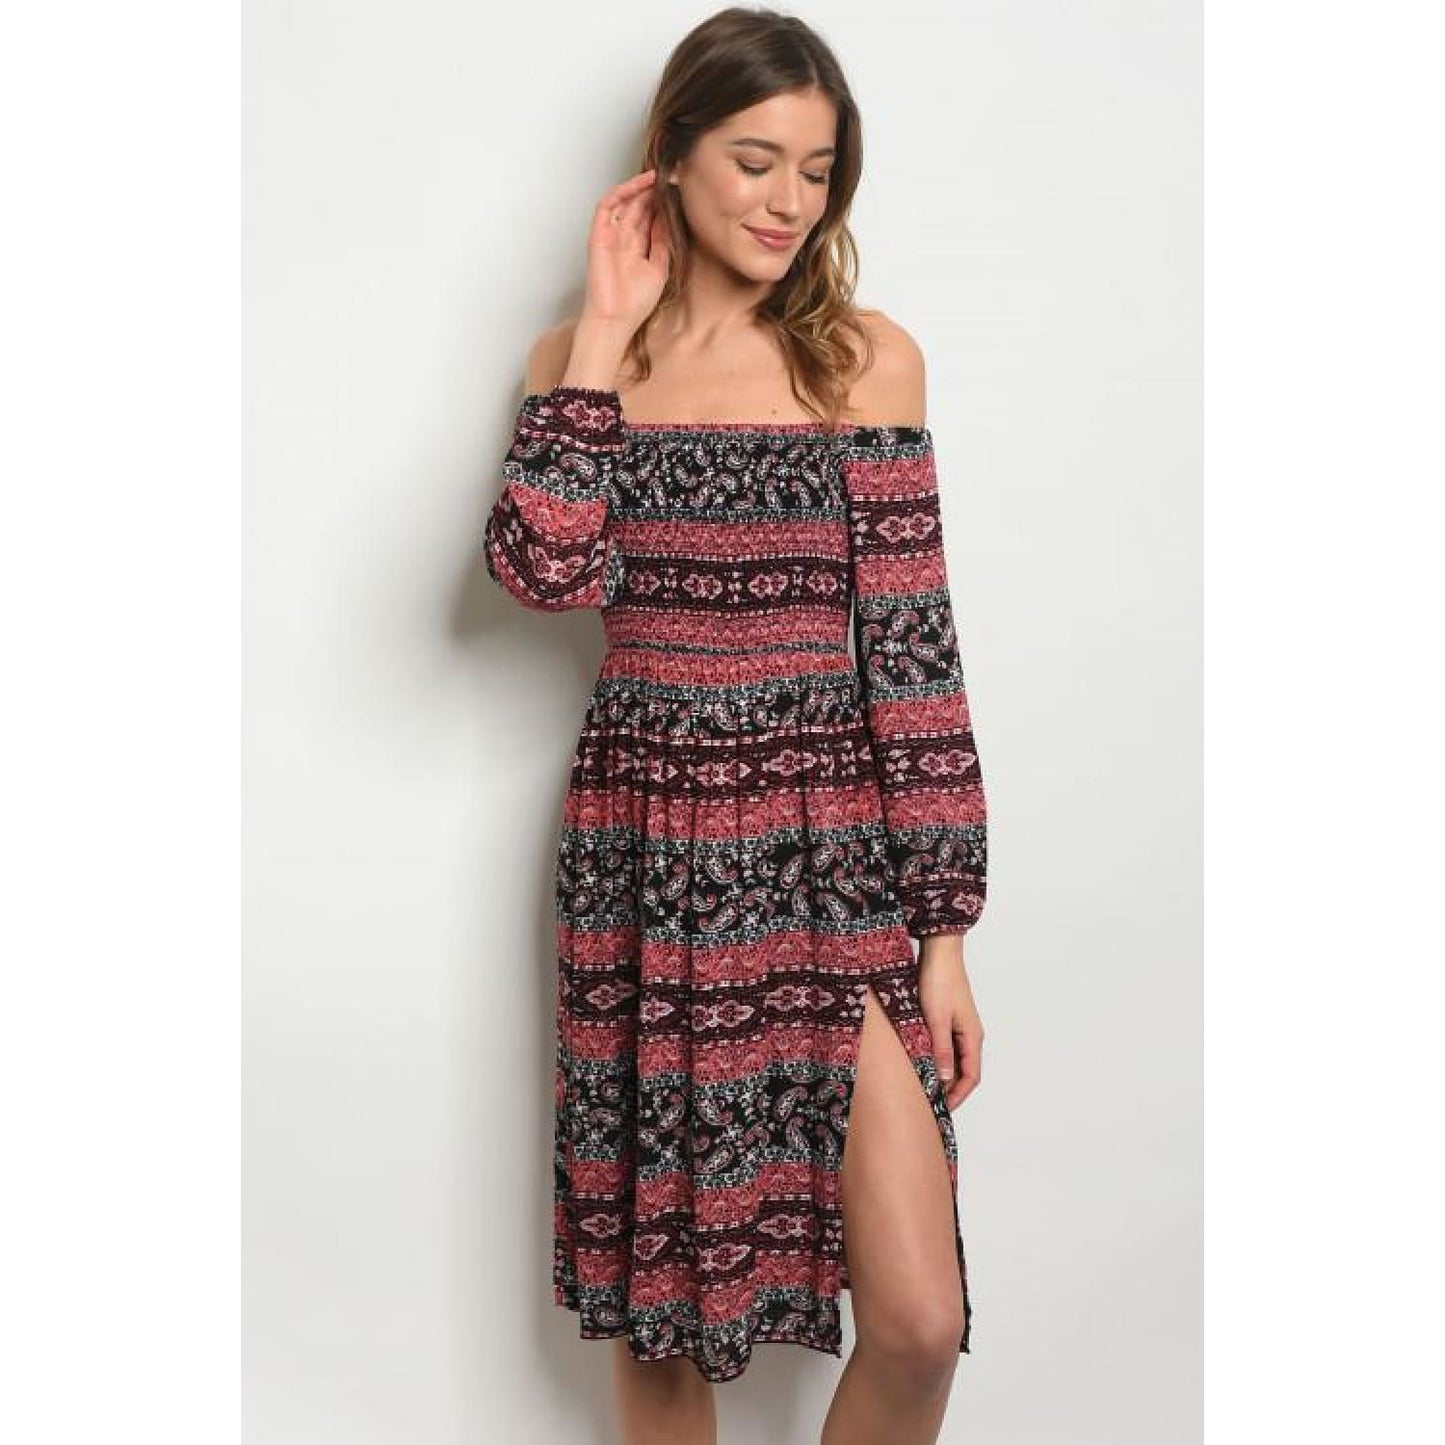 Coral White Black Print Dress - Best YOU by HTS